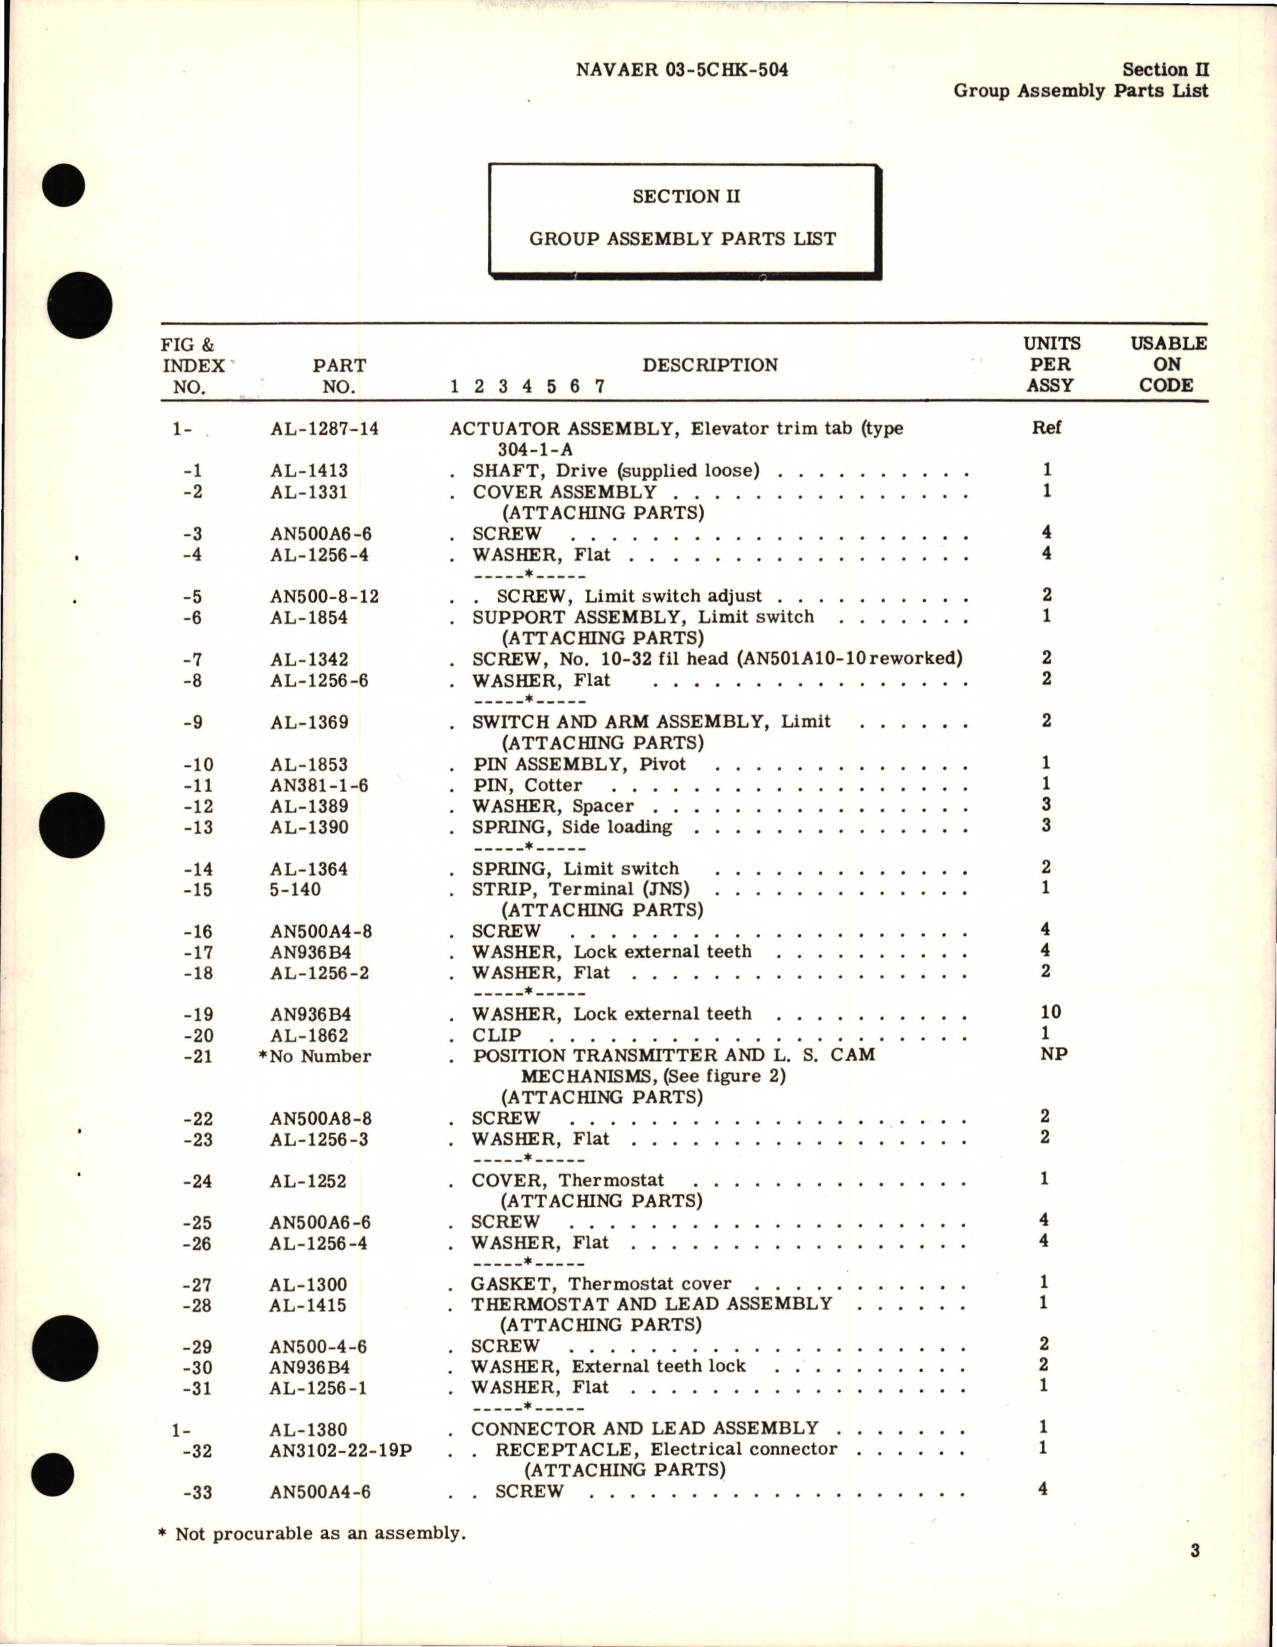 Sample page 5 from AirCorps Library document: Illustrated Parts Breakdown for Actuator Assembly - Elevator Trim Tab Part No. AL-1287-14, Type 304-1-A